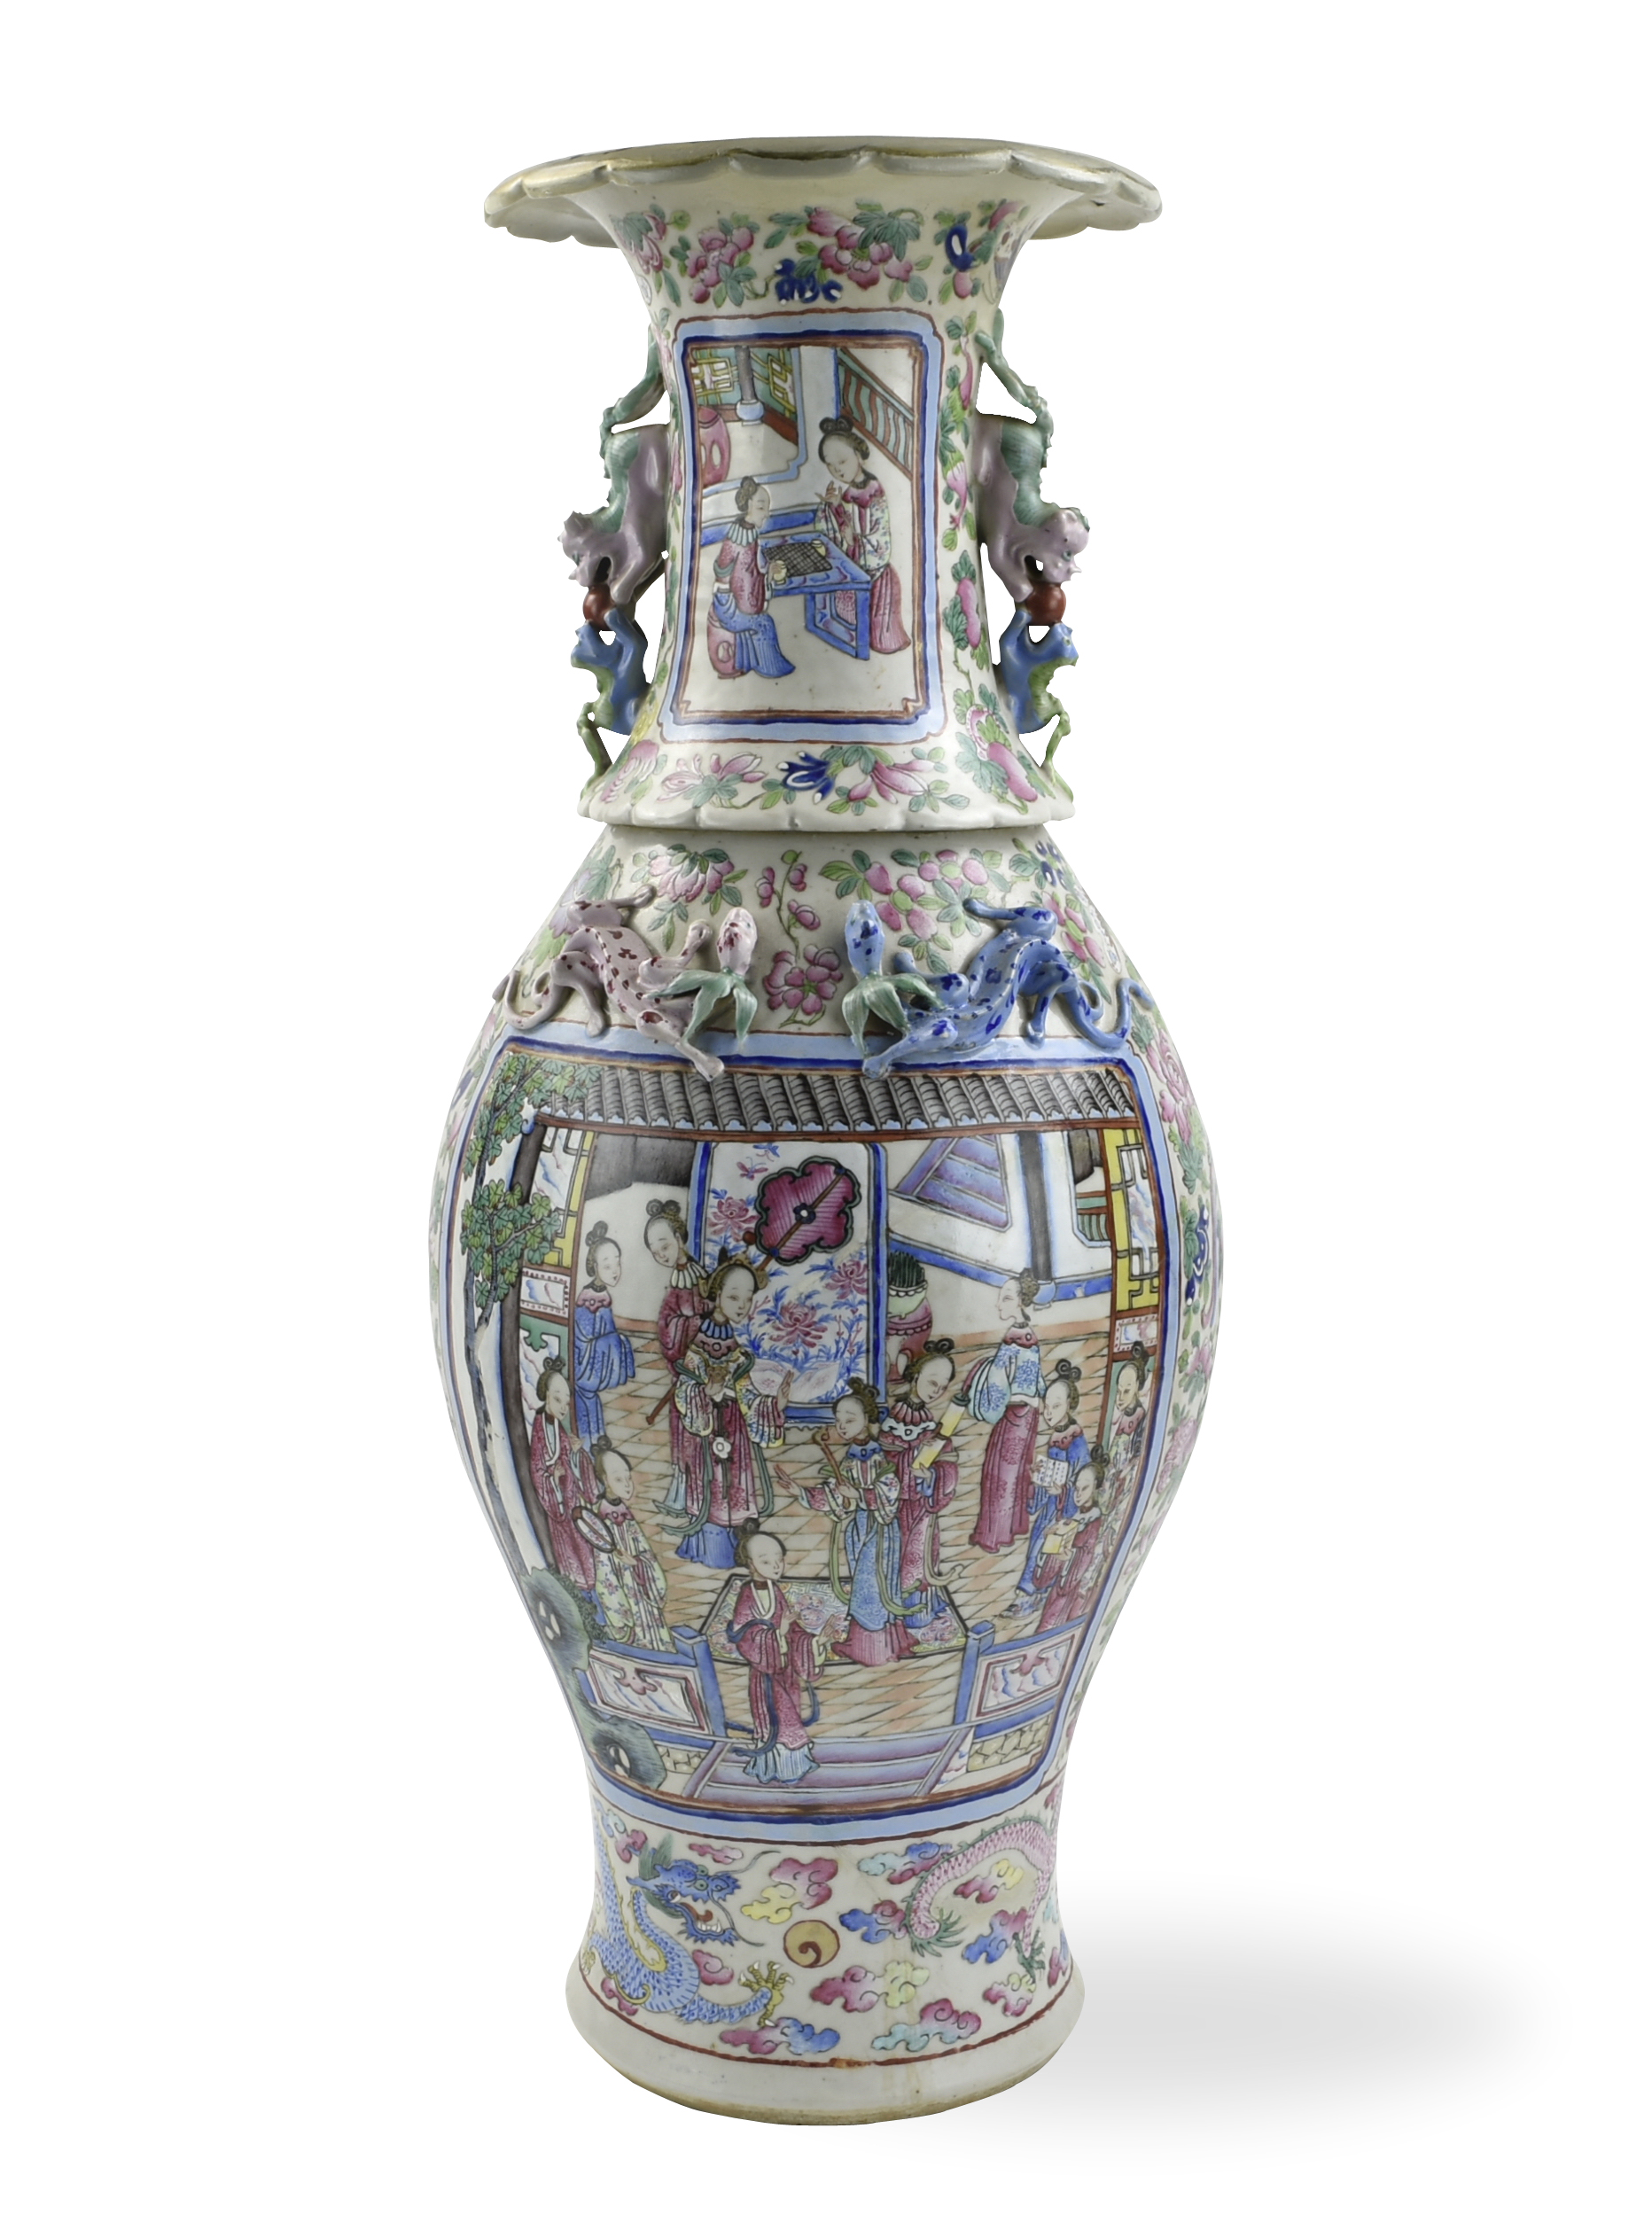 A LARGE CHINESE CANTON GLAZED VASE,19TH